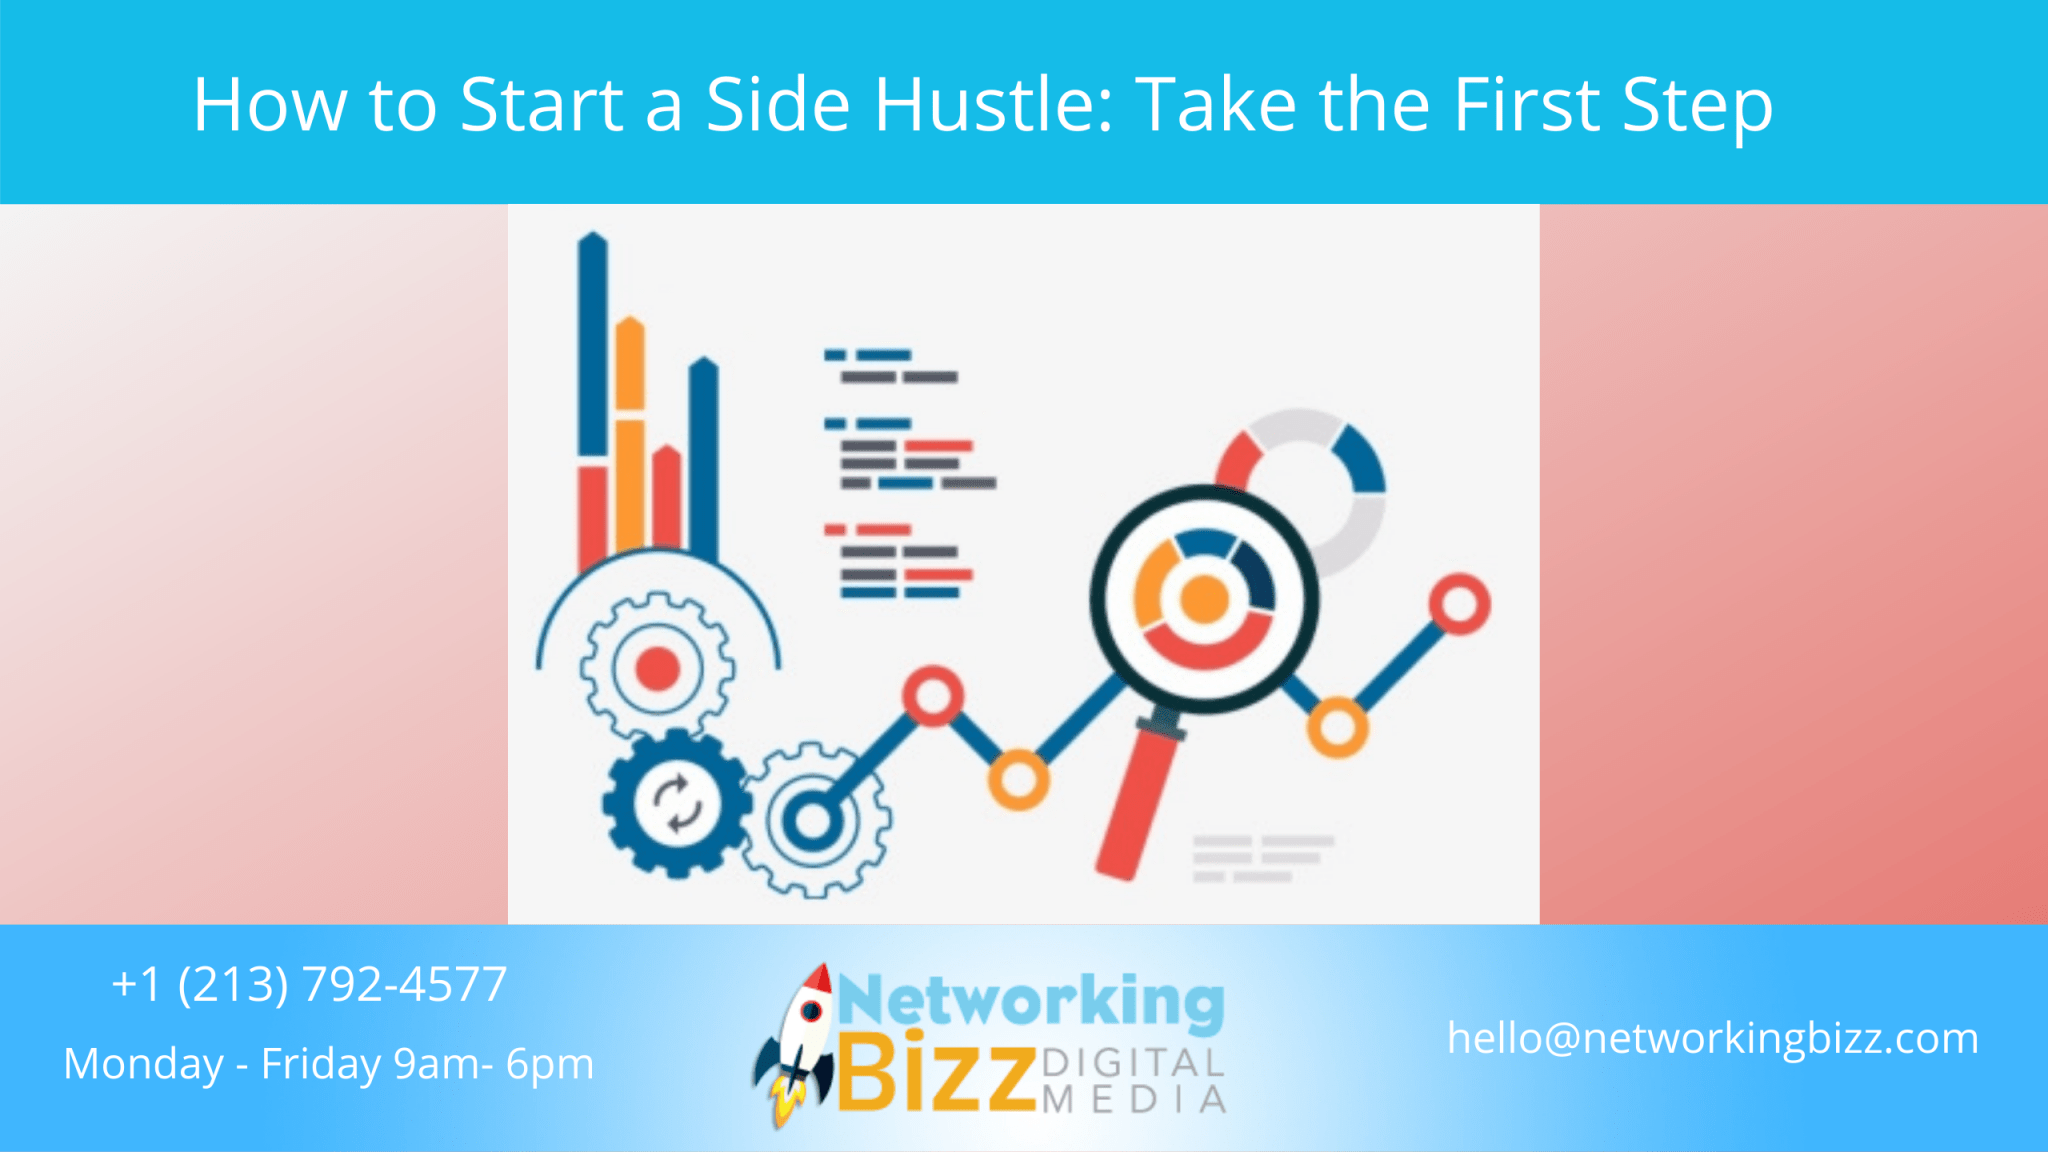 How to Start a Side Hustle: Take the First Step